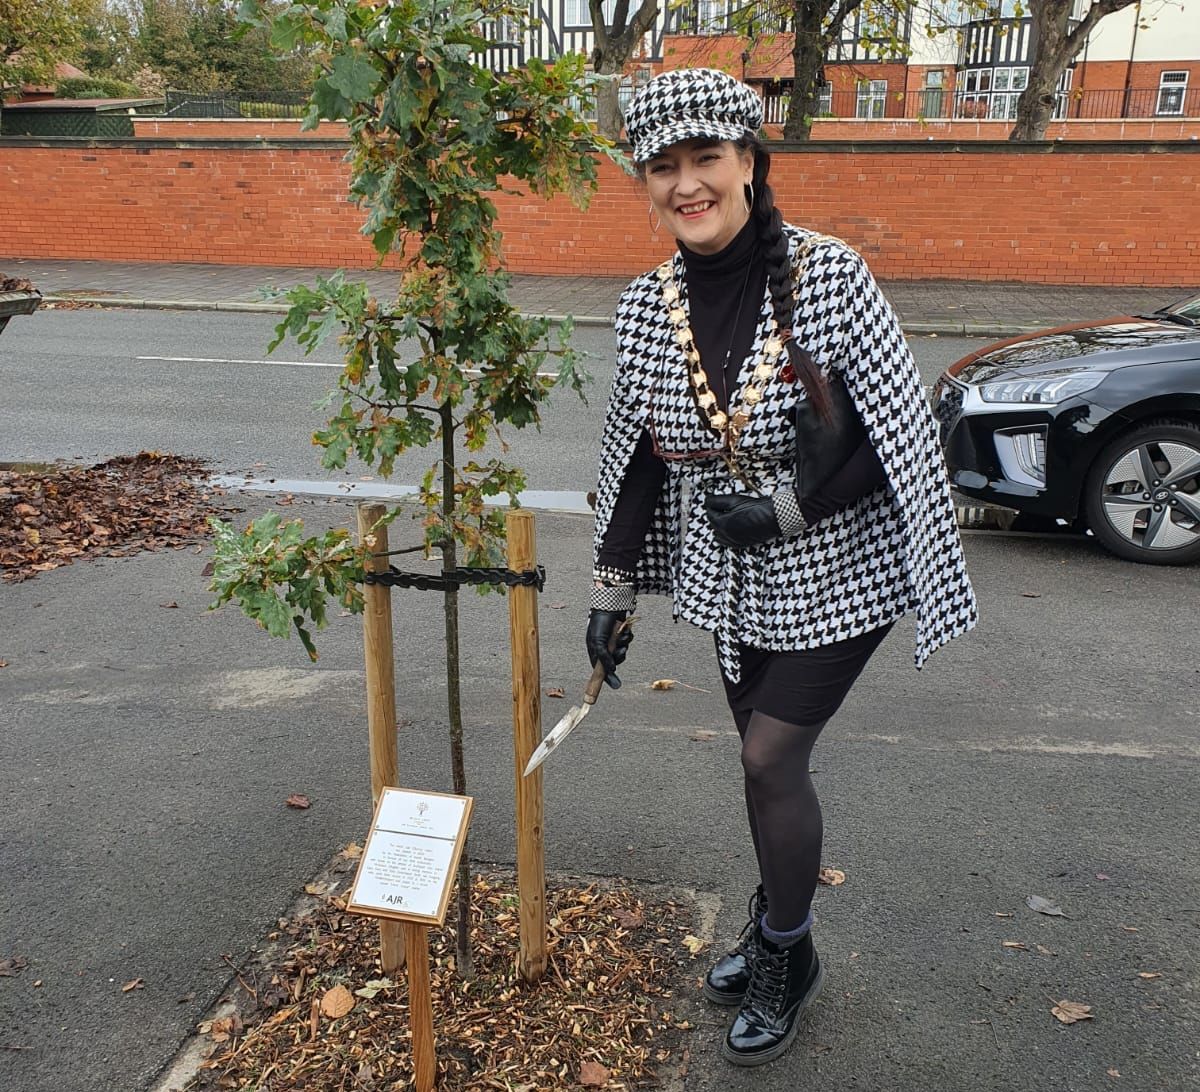 A pair of native oak trees have been planted at Argyle Road in Southport and Alexandra Park in Crosby as part of a nationwide campaign marking the 80th anniversary of the Association of Jewish Refugees (AJR)  the national charity providing social and welfare services to Holocaust refugees and survivors in the UK. The trees were planted by Mayor of Sefton Cllr Clare Carragher